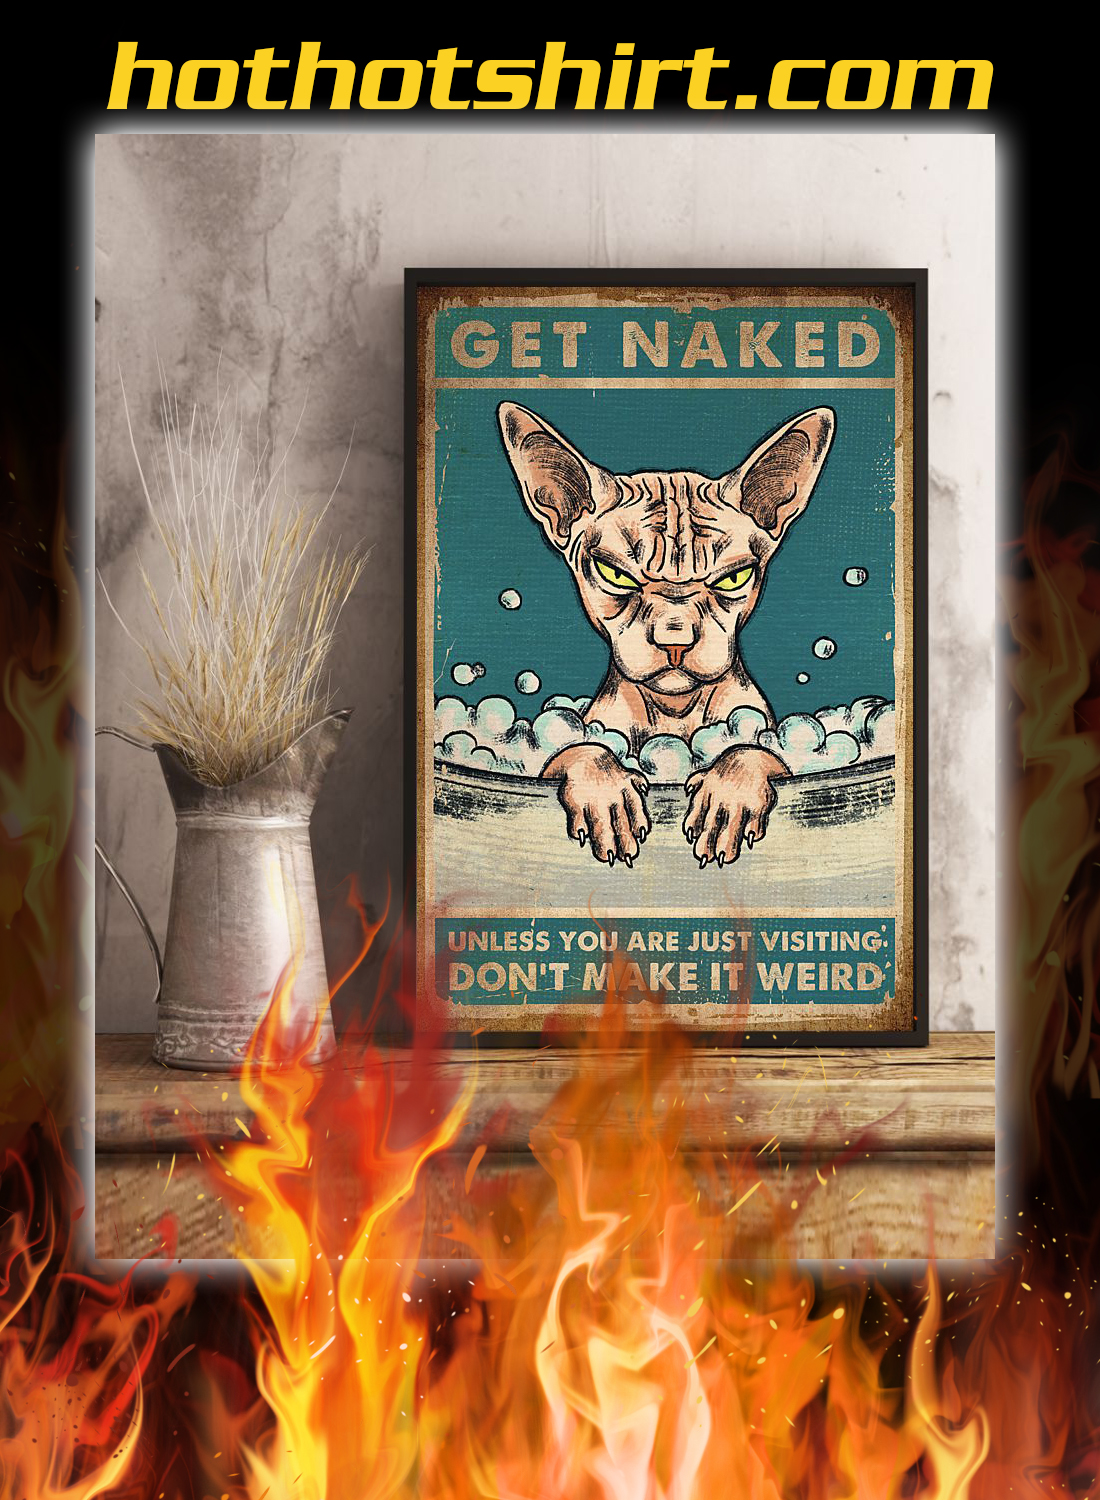 Sphynx cat get naked unless you are just visiting don’t make it weird poster